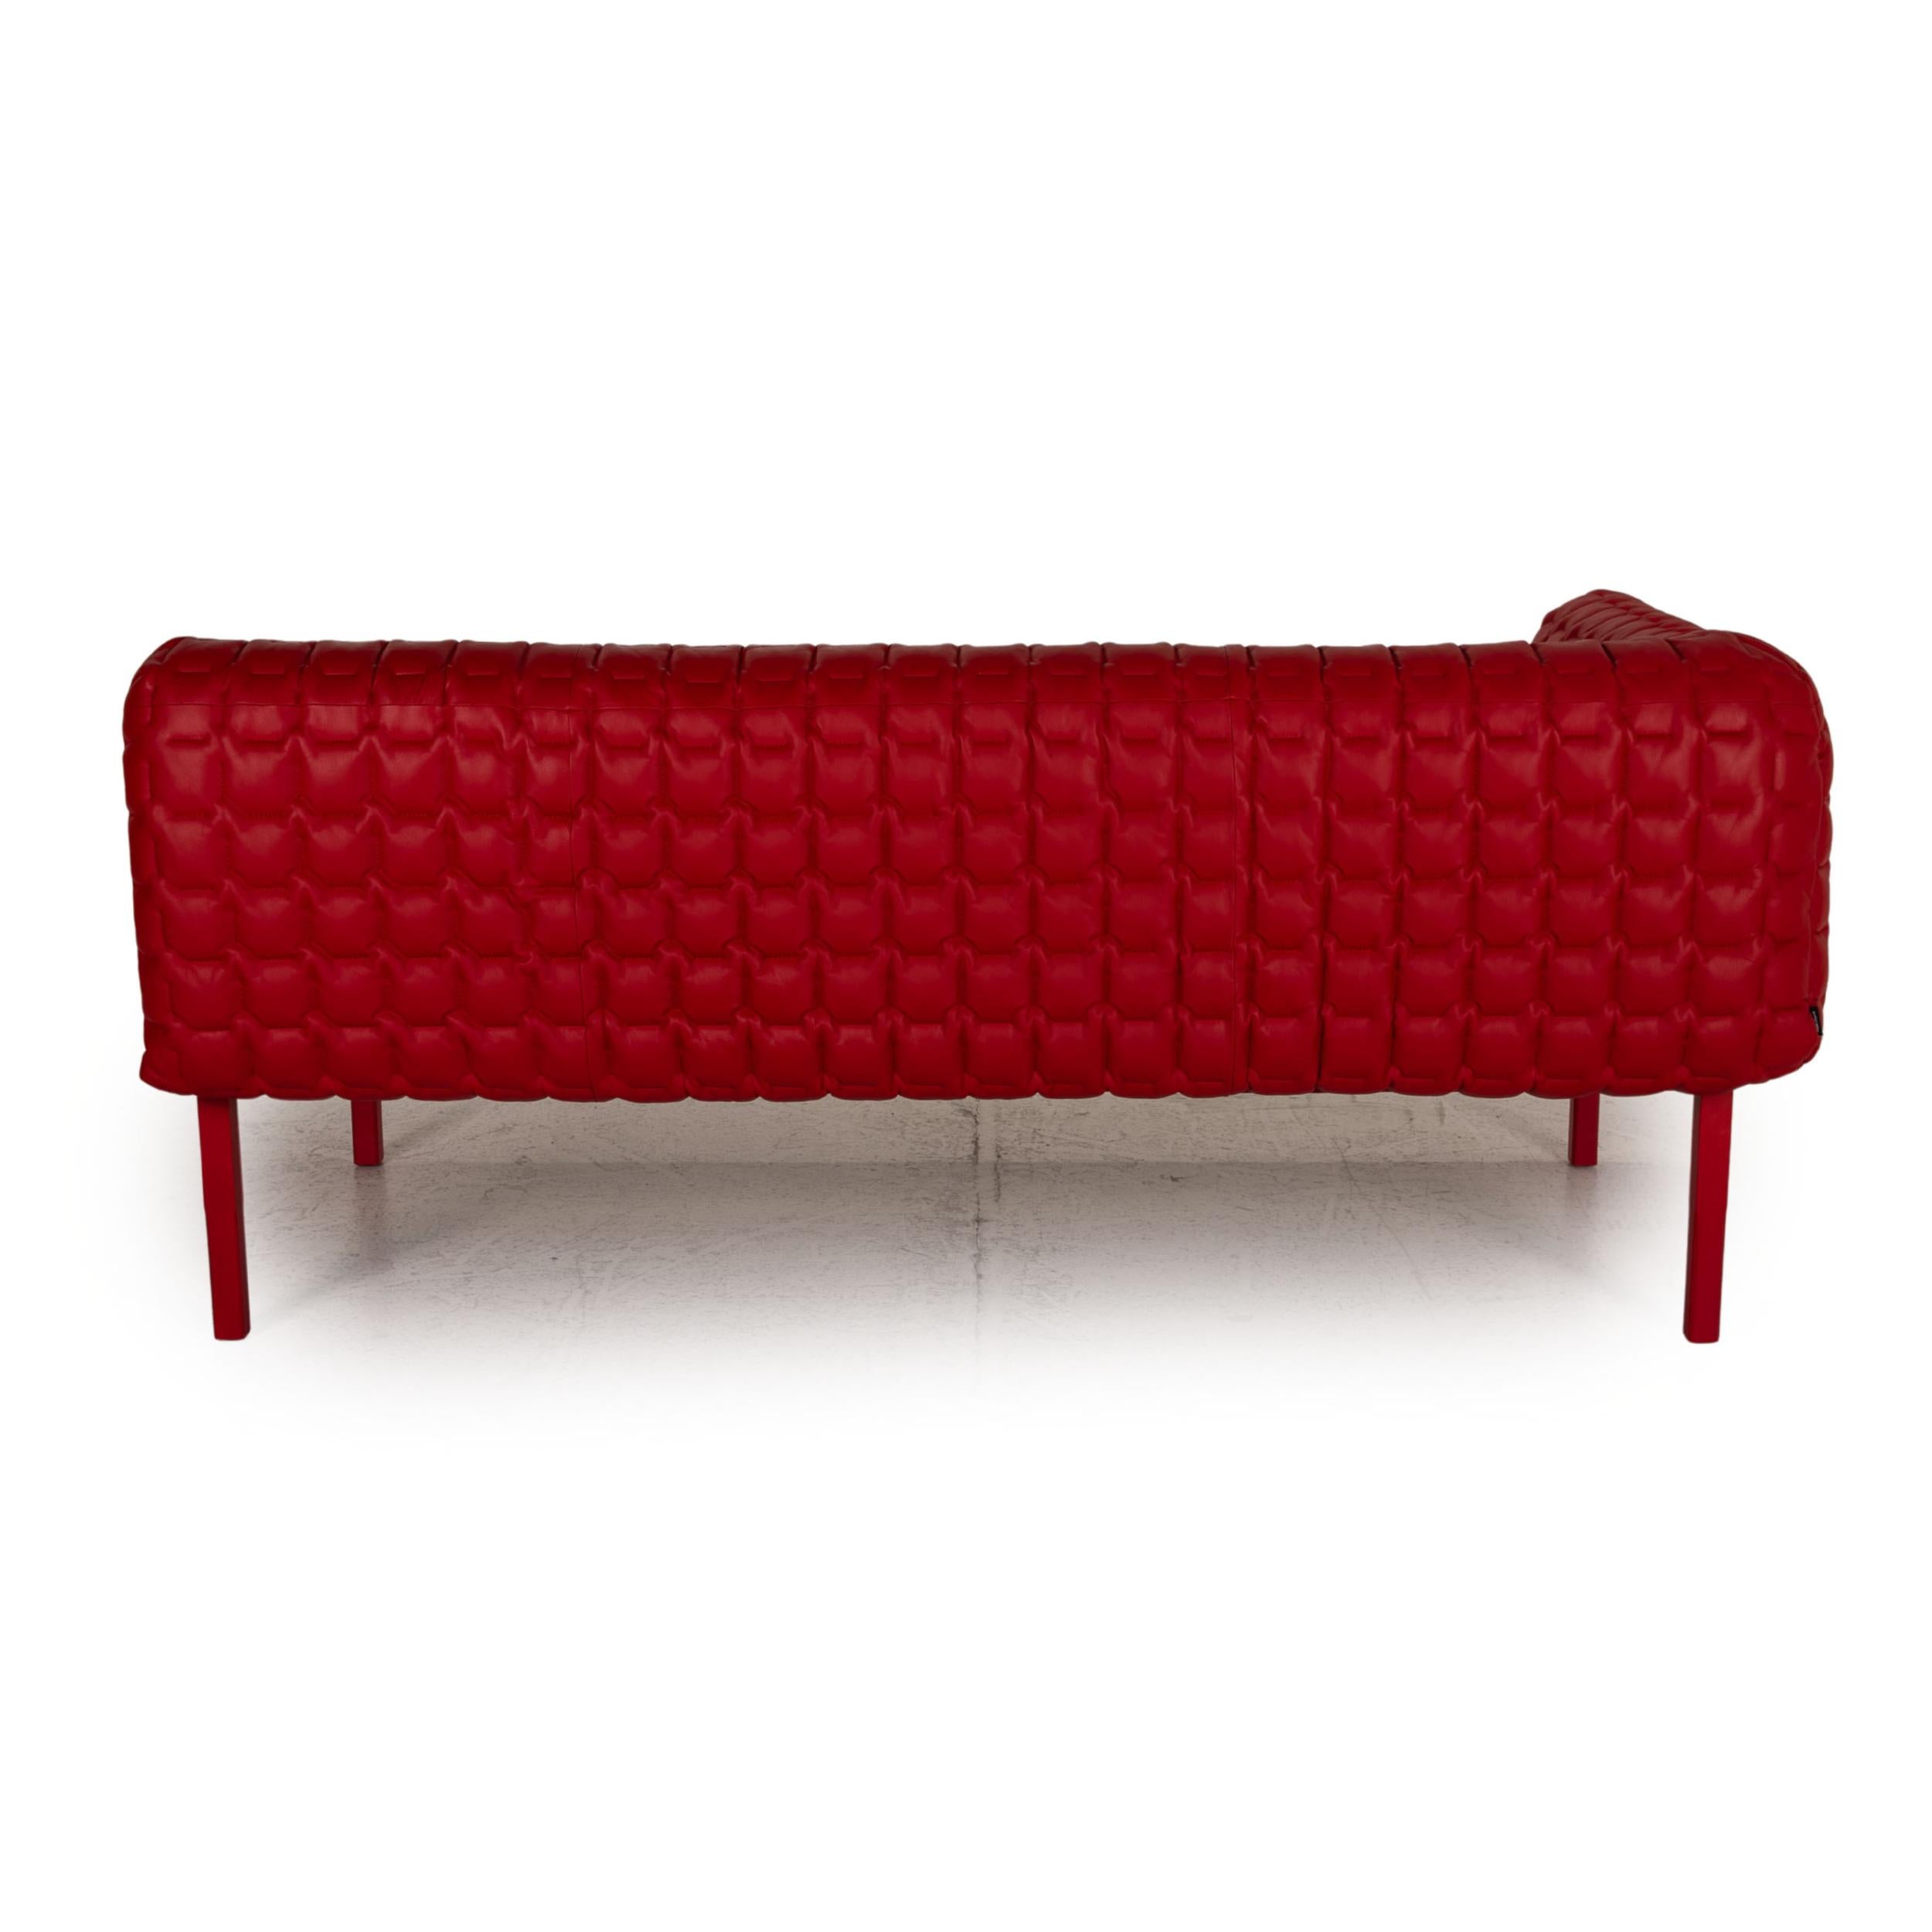 Ligne Roset Ruch Leder Lounger Rote Sofa Couch Meridienne Chaise Longue im Angebot 1